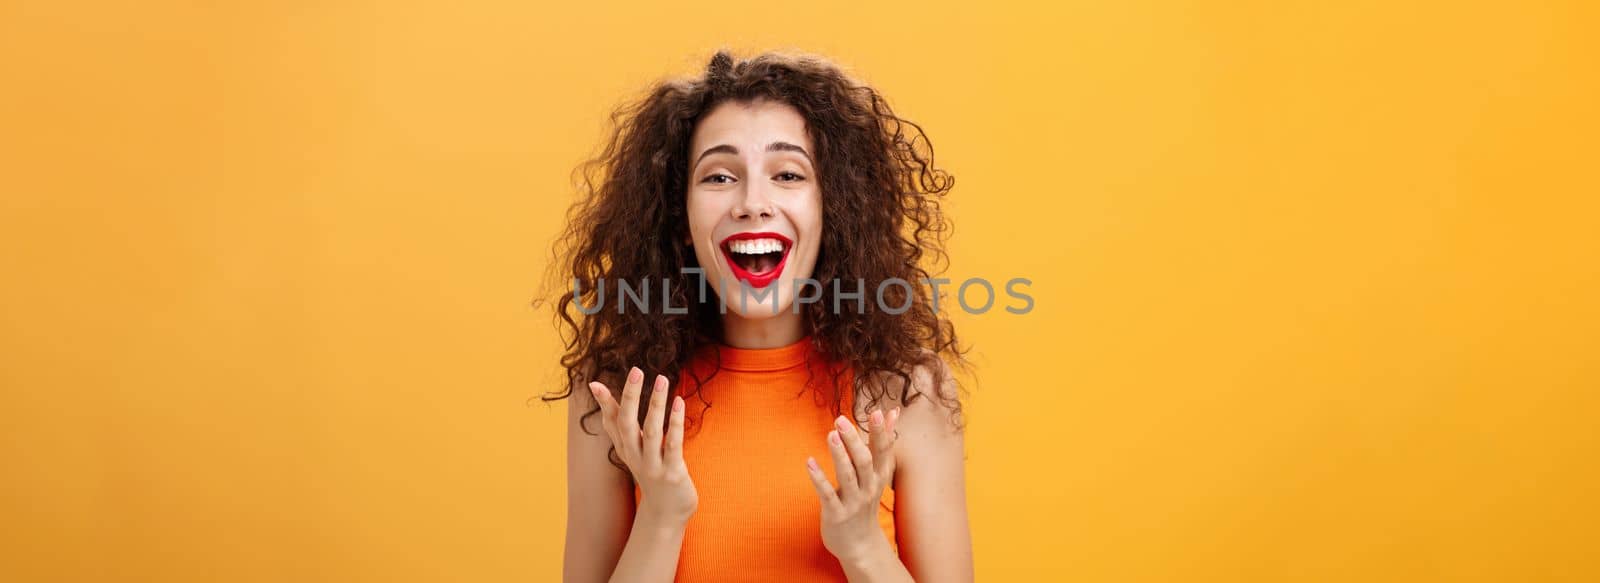 Surprised thrilled and joyful charming european female. with curly hairstyle raising palms in grateful and delighted gesture smiling broadly hearing unbelievable perfect news over orange wall. Copy space